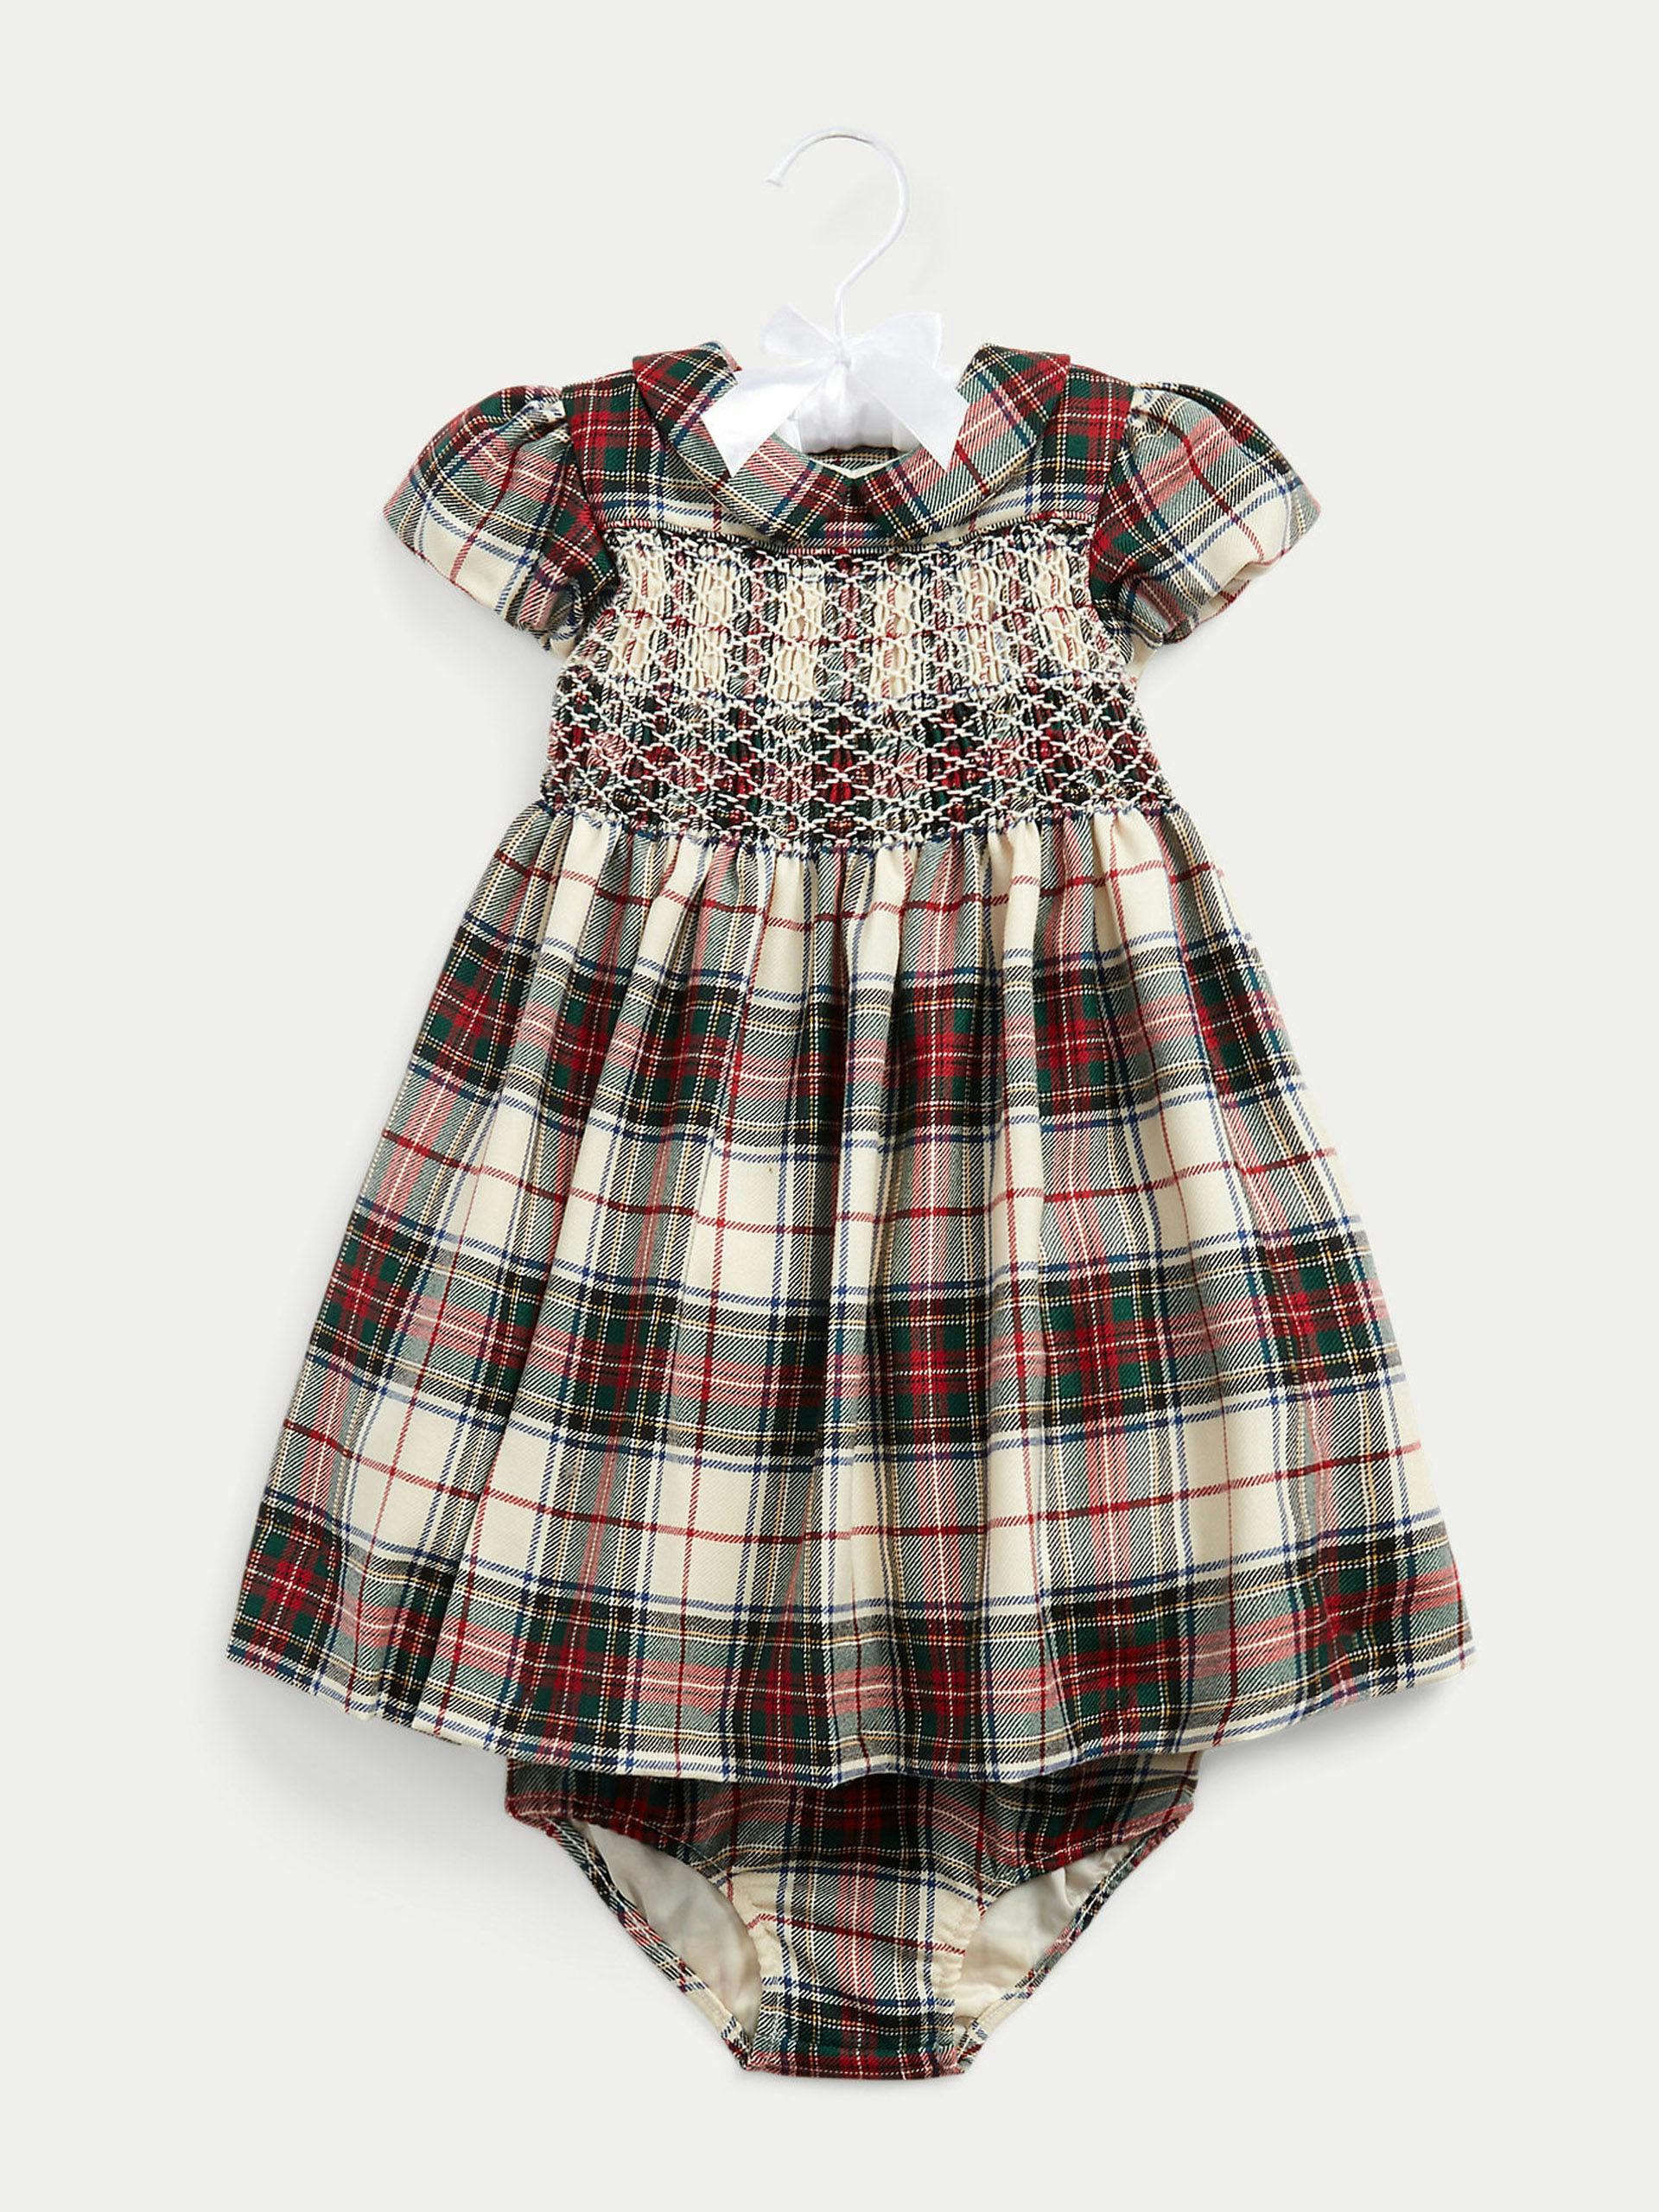 Chequered smocked wool dress